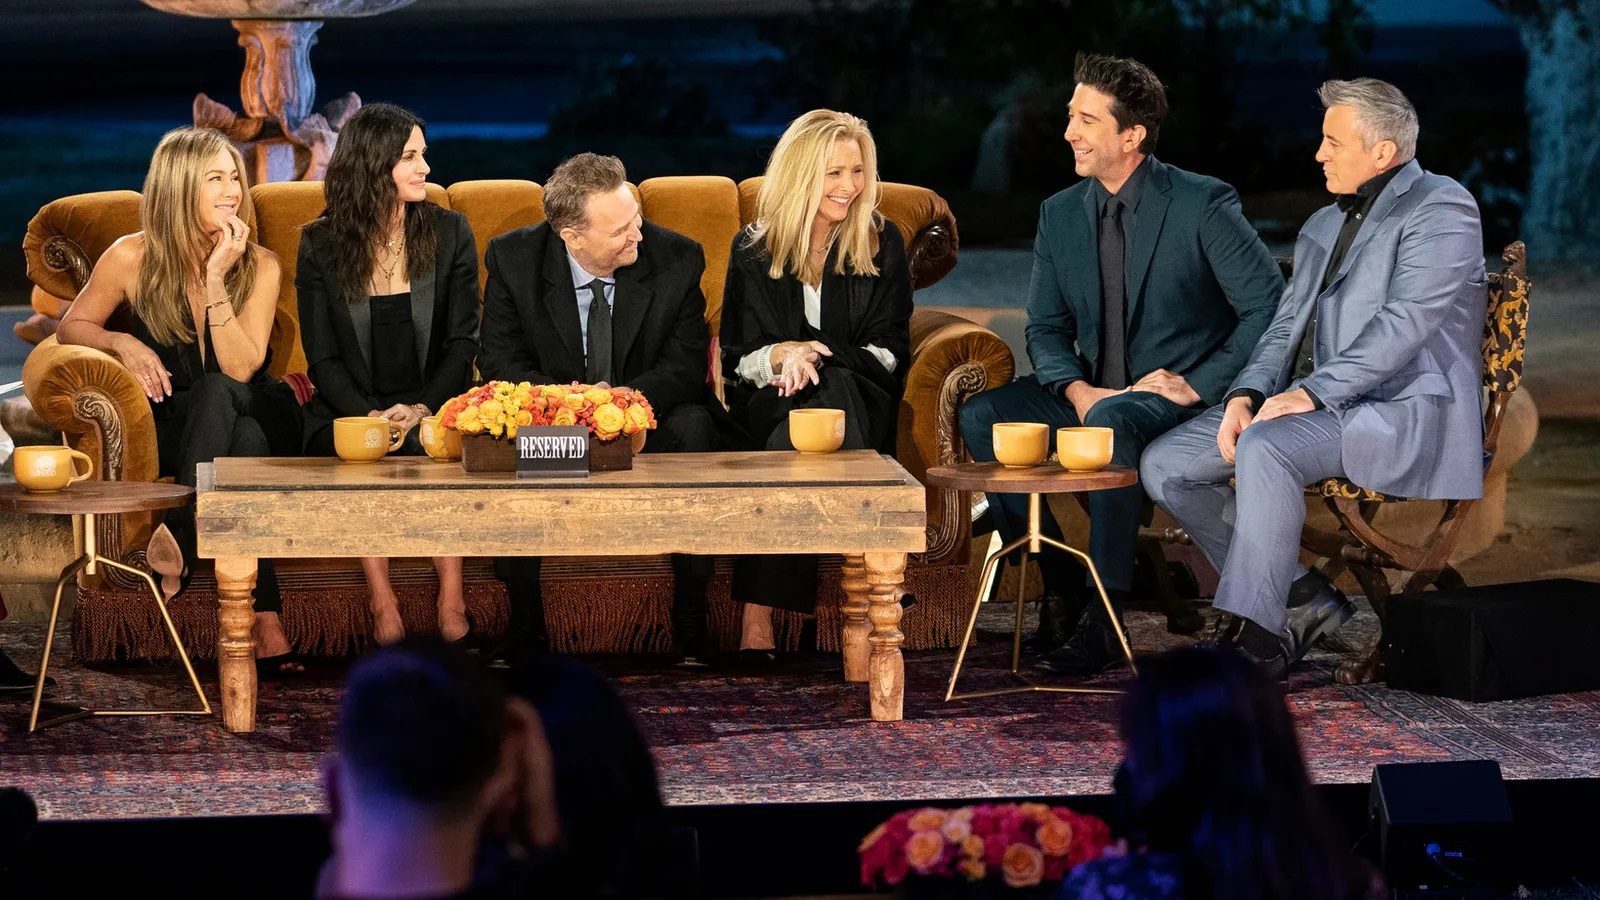 Review: Friends Reunion – Shines And Hypes!